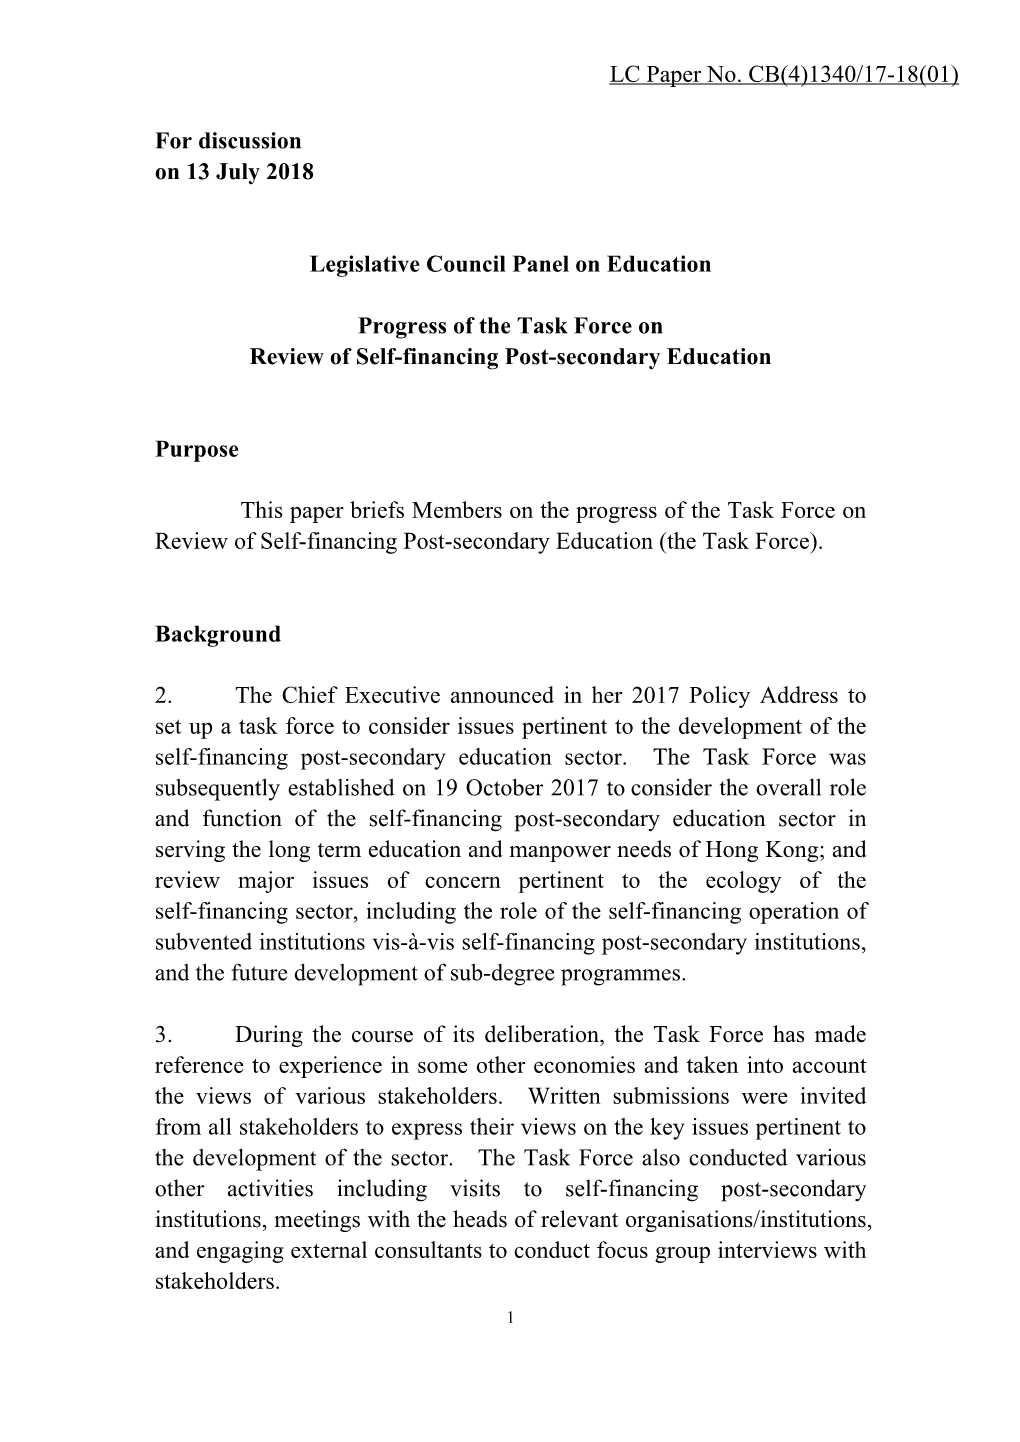 Administration's Paper on Progress of the Task Force on Review of Self